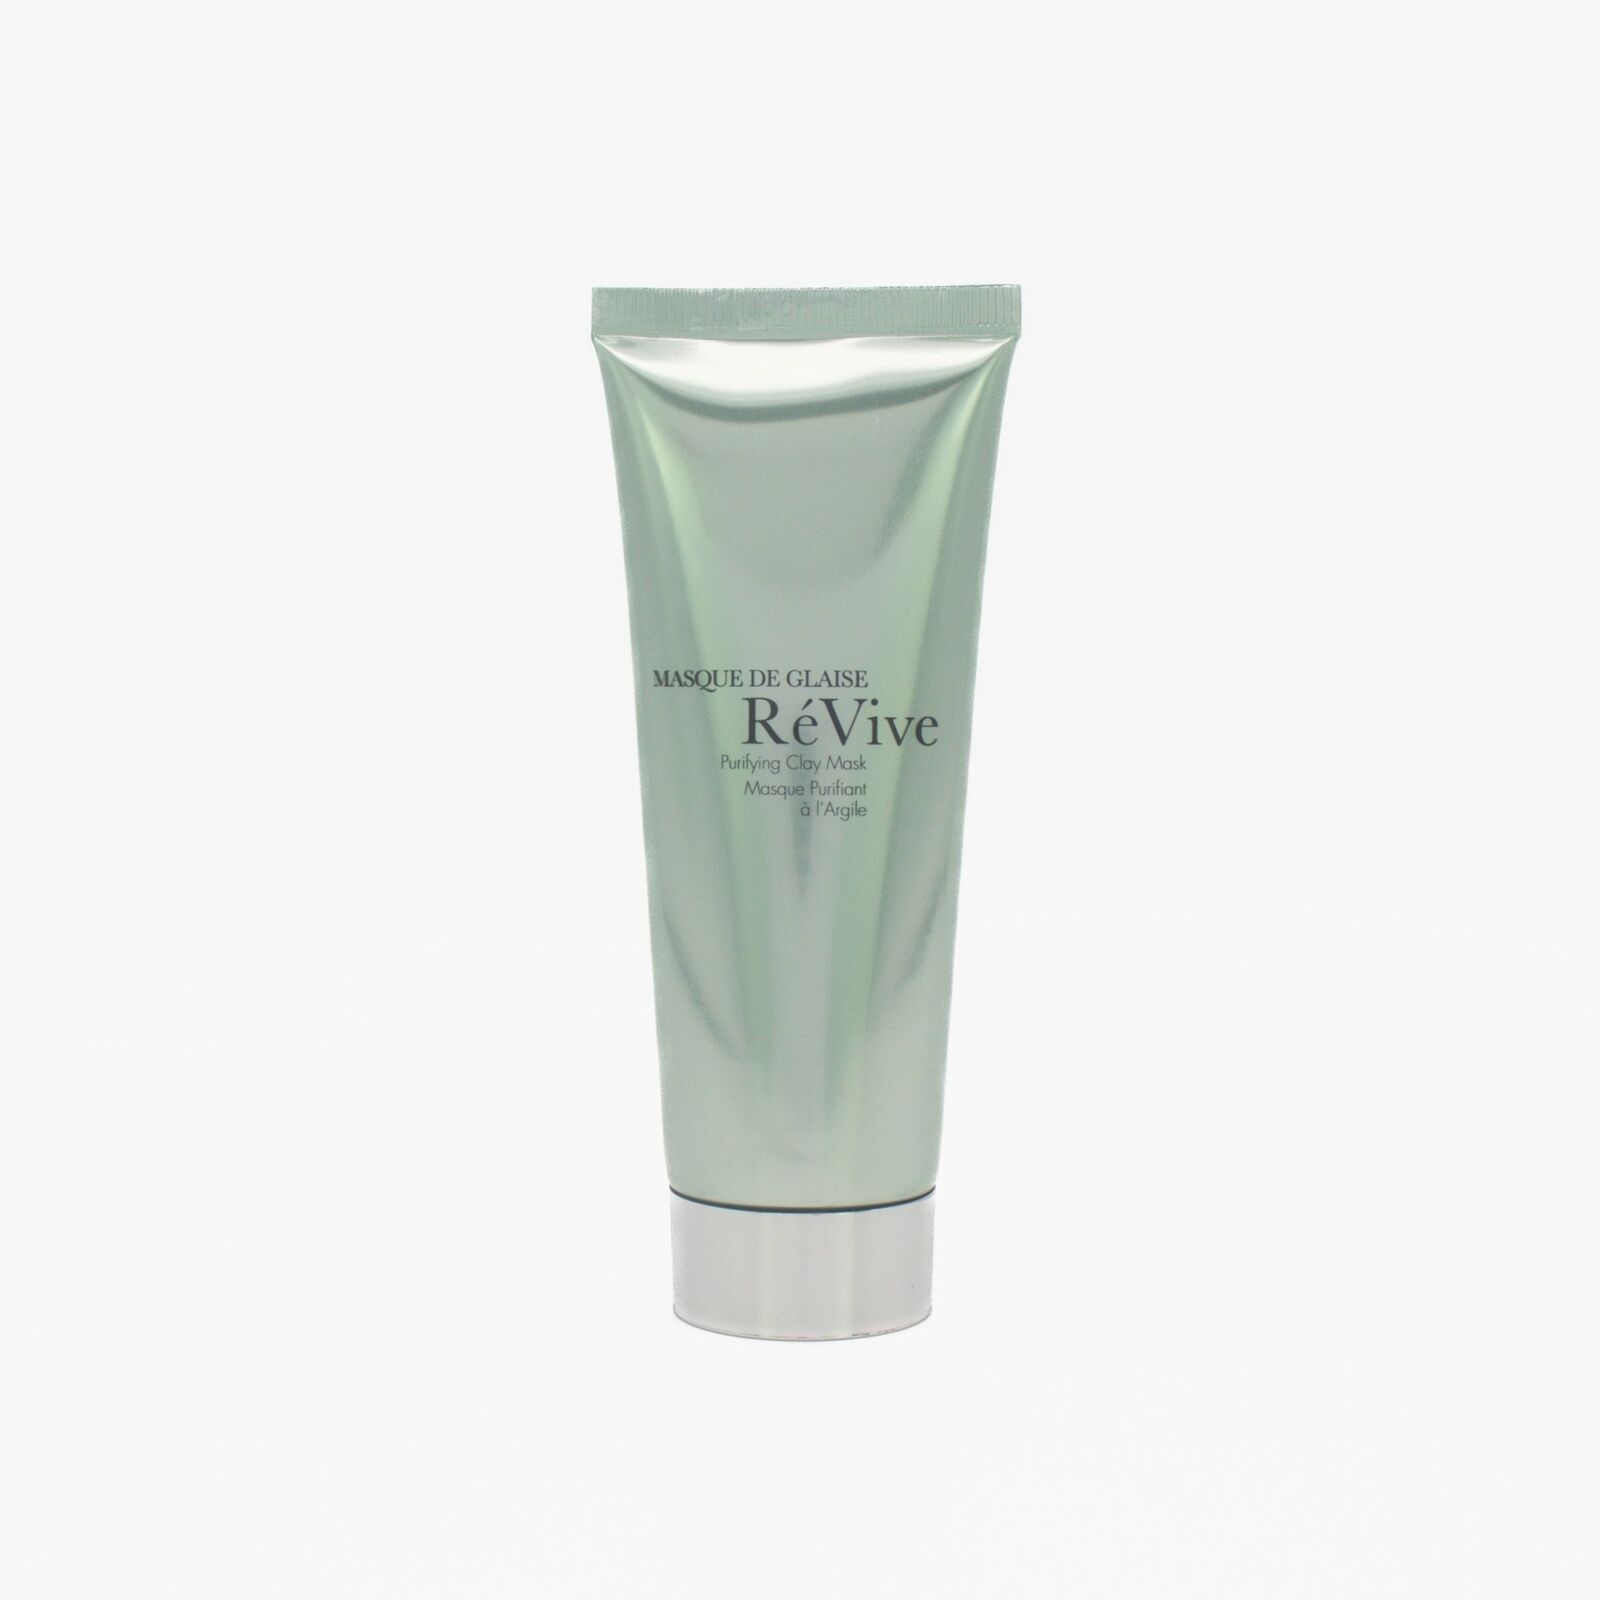 Revive Purifying Clay Mask - 75g